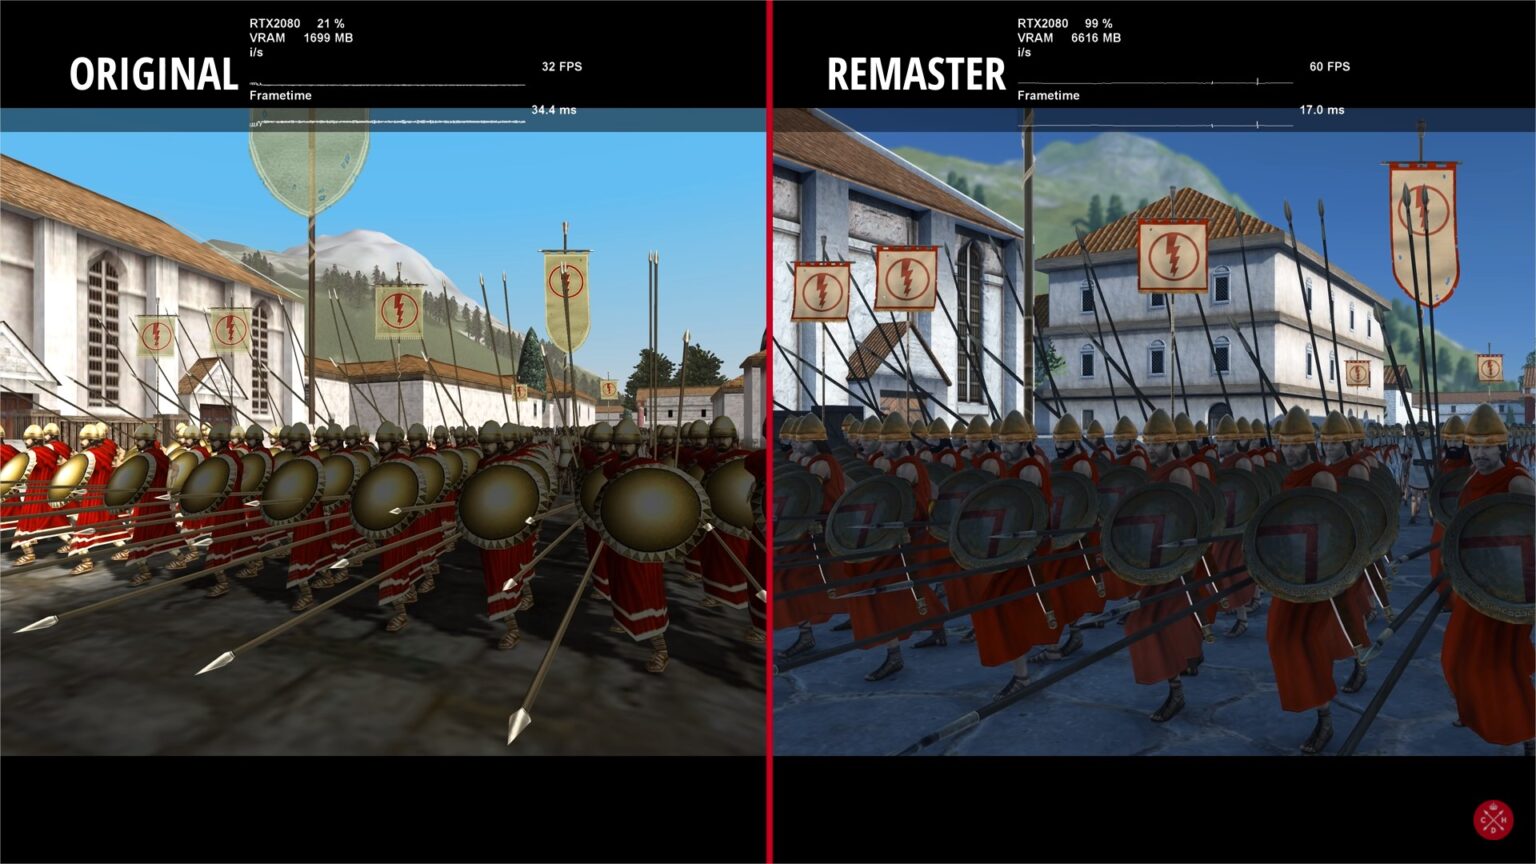 total war rome remastered release date